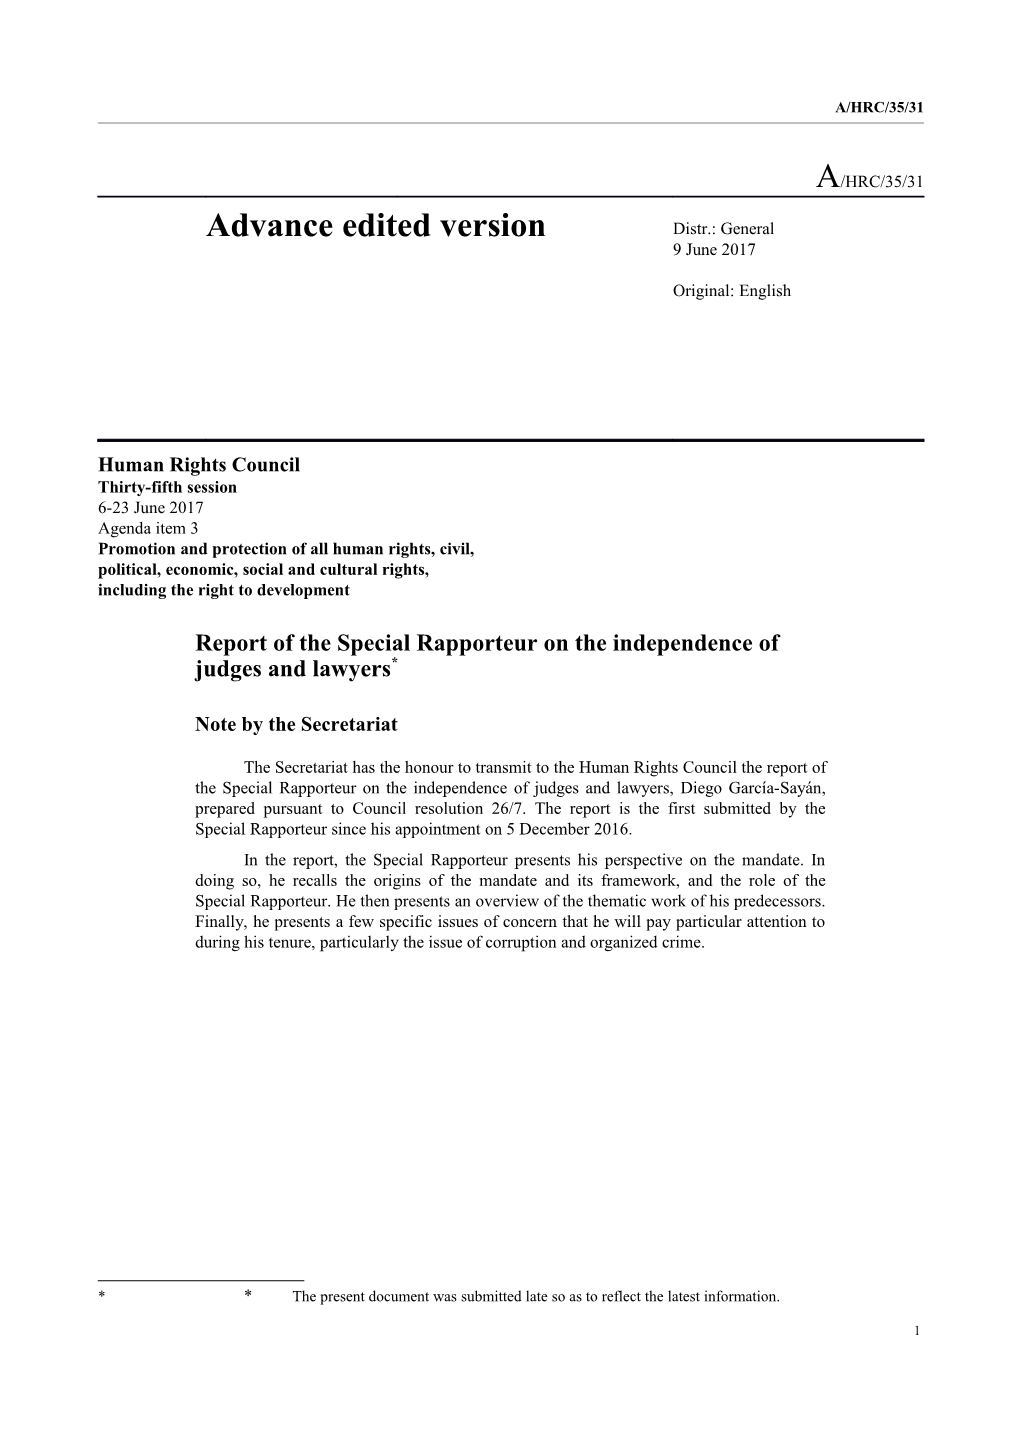 Report of the Special Rapporteur on the Independence of Judges and Lawyers in English